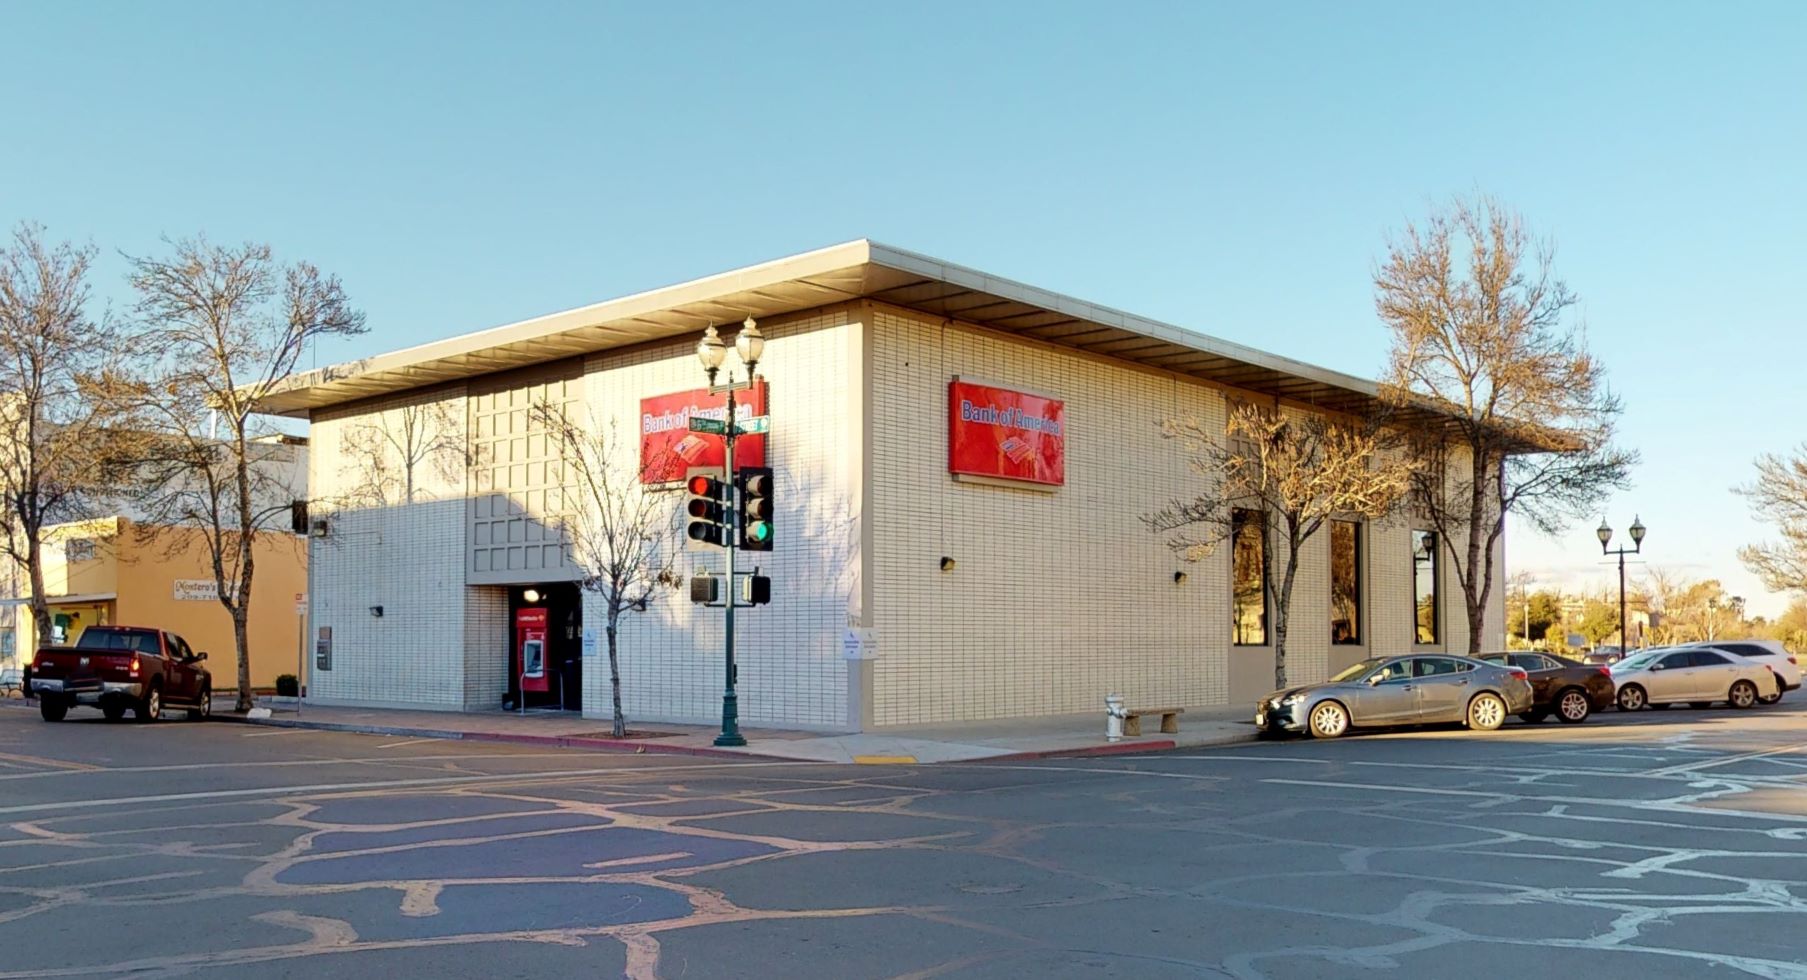 Bank of America financial center with drive-thru ATM | 556 I St, Los Banos, CA 93635